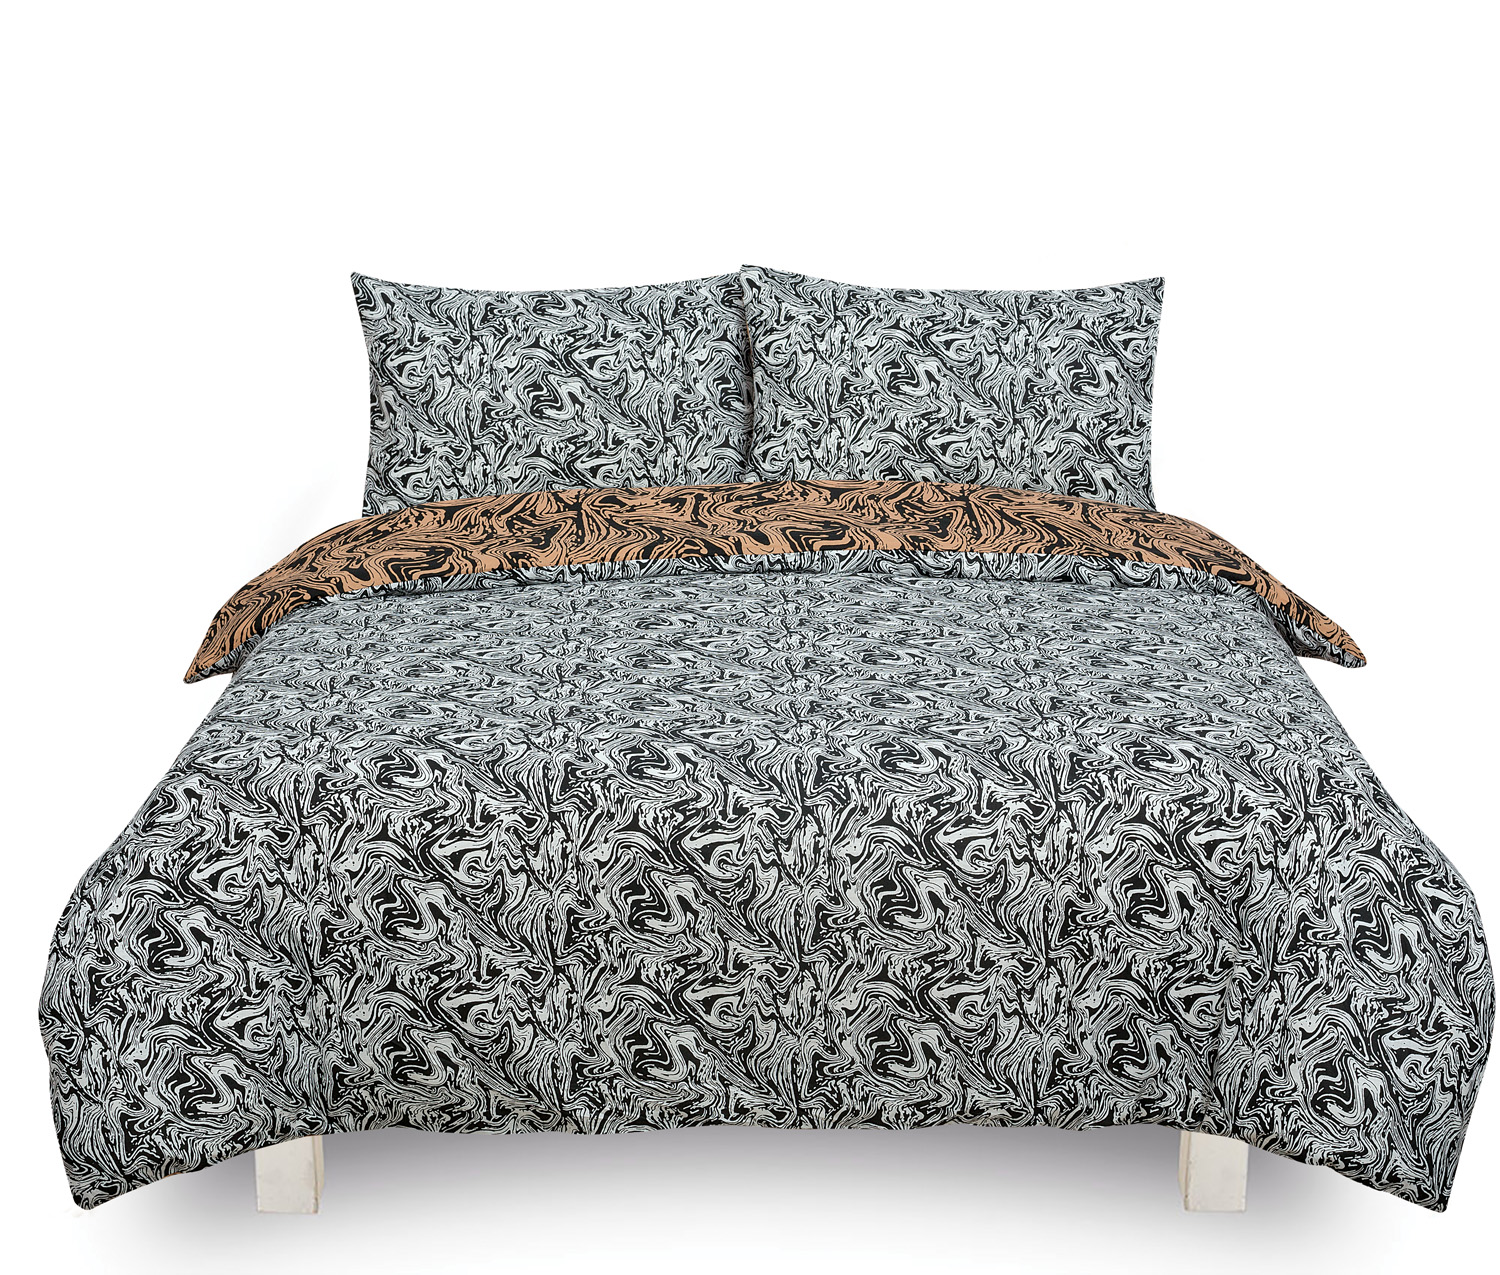 Marble Brown Reversible Rotary King Bed Duvet Quilt Cover Set